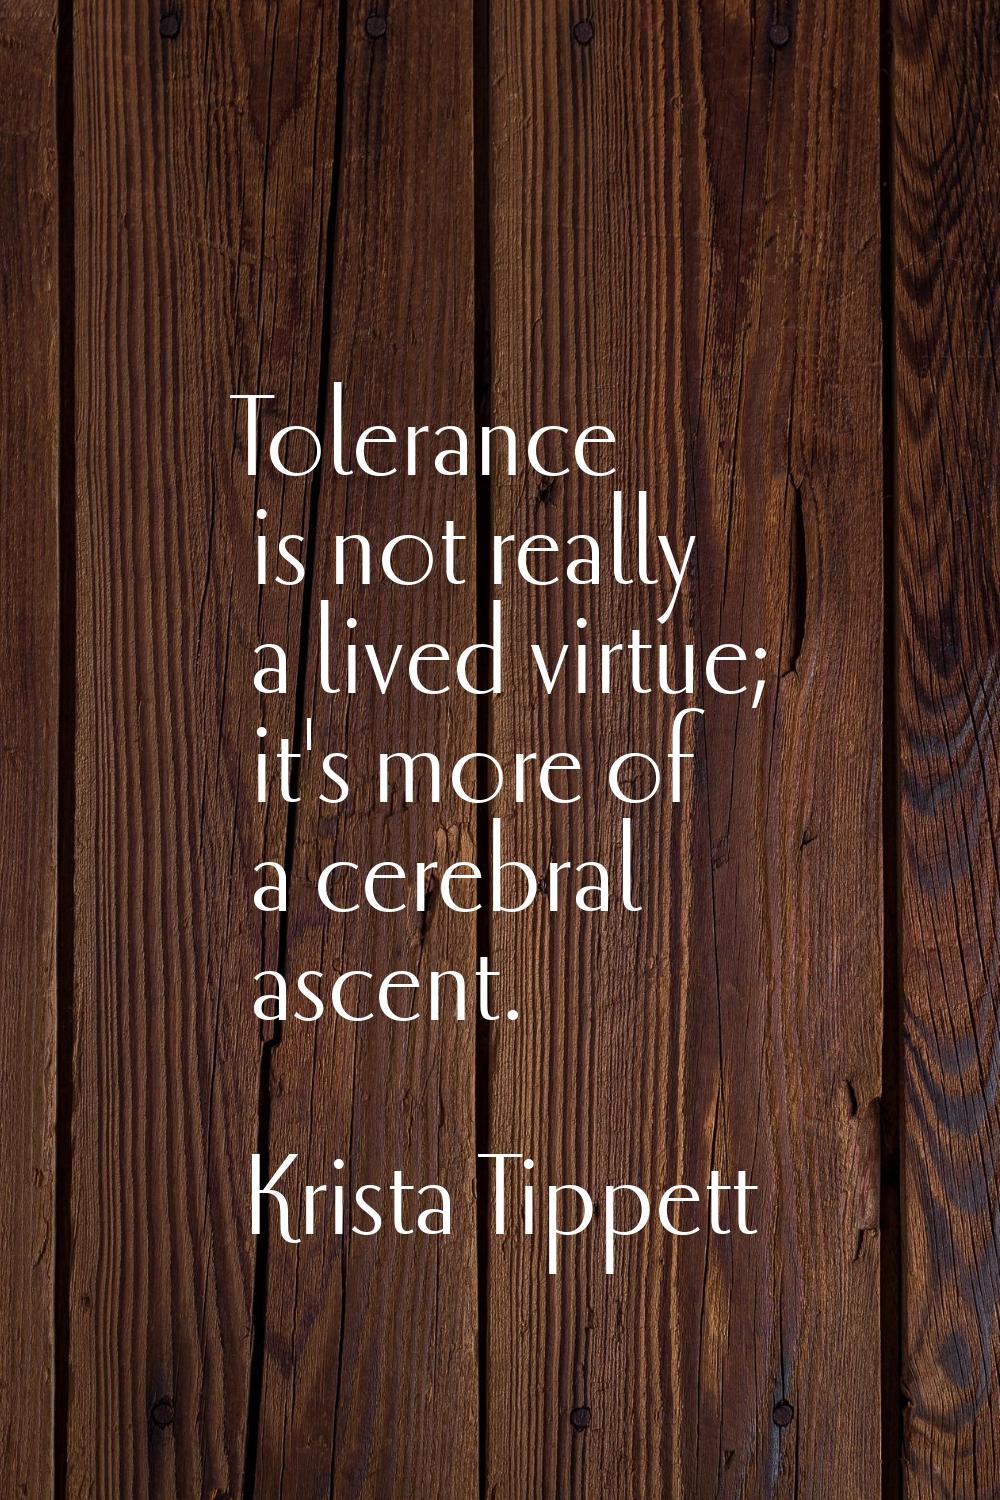 Tolerance is not really a lived virtue; it's more of a cerebral ascent.